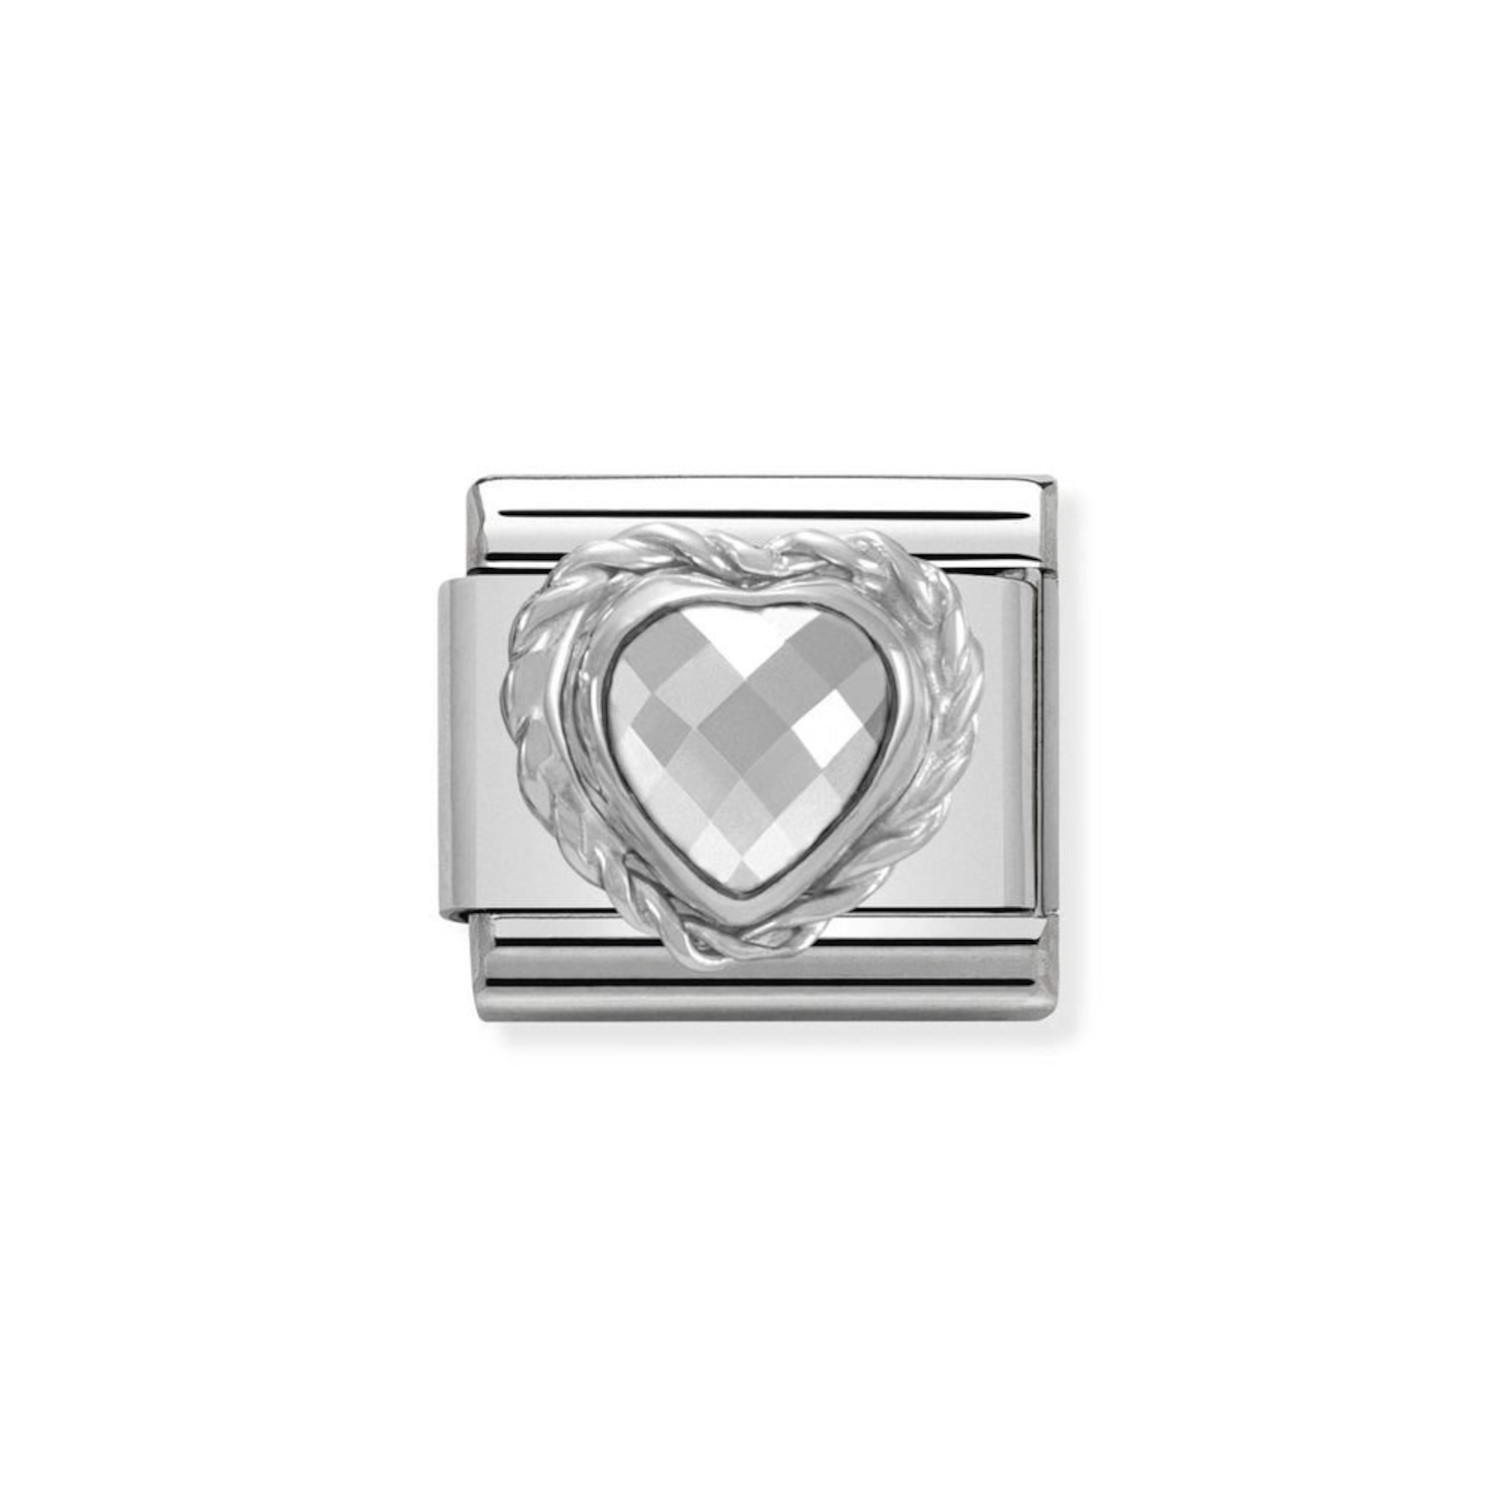 NOMINATION COMPOSABLE CLASSIC LINK IN STERLING SILVER WITH HEART-SHAPED FACETED WHITE STONE 330603/010